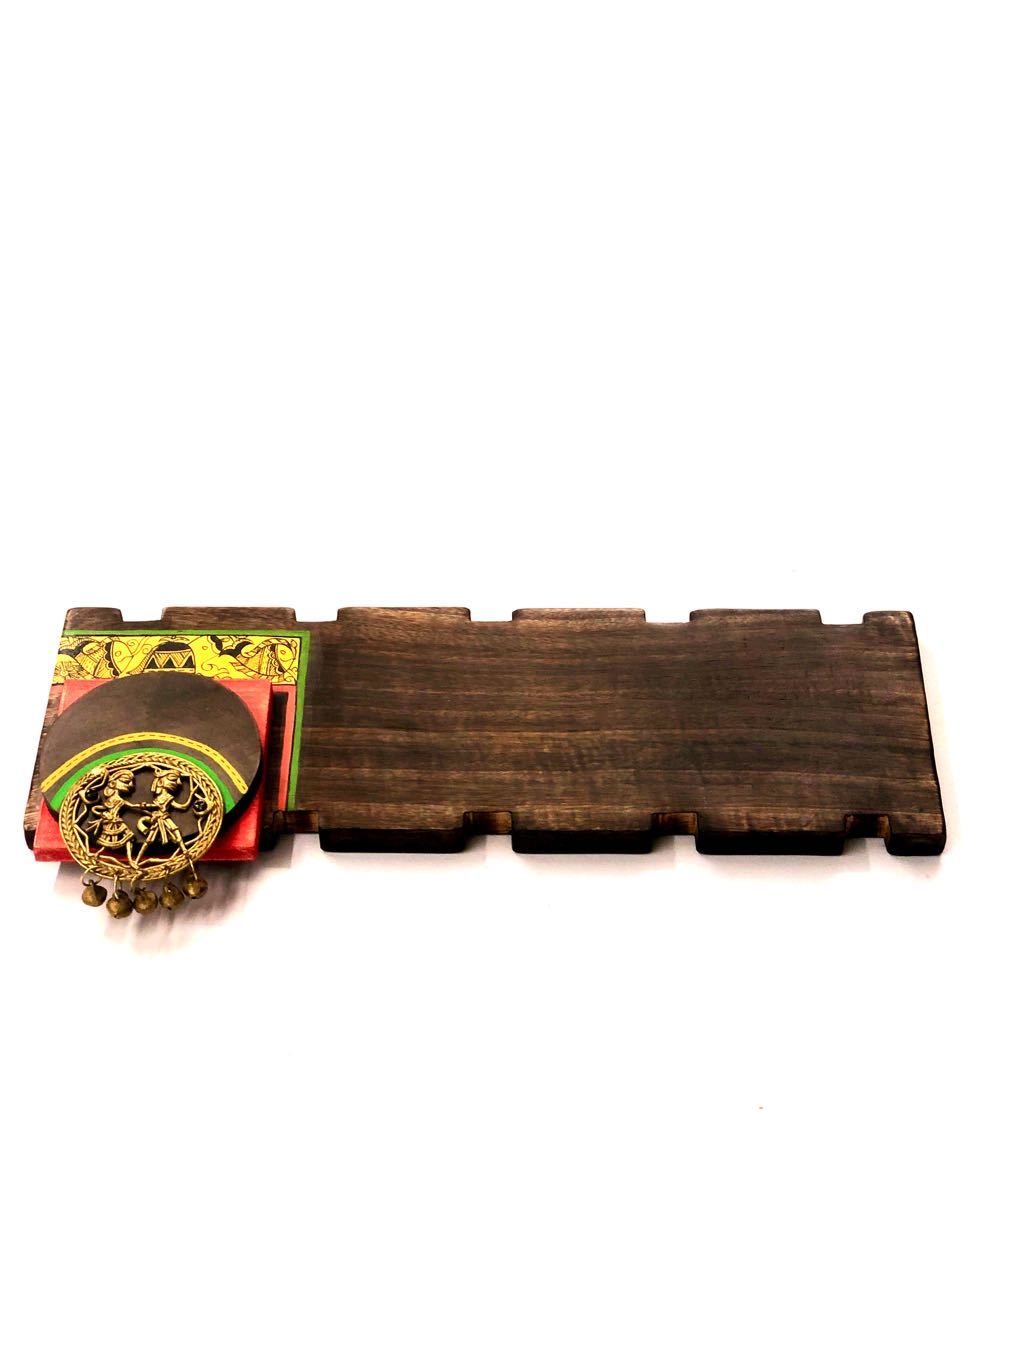 Colorful HandPainted Wooden Name Plate With Dhokra Figures Tamrapatra - Tamrapatra